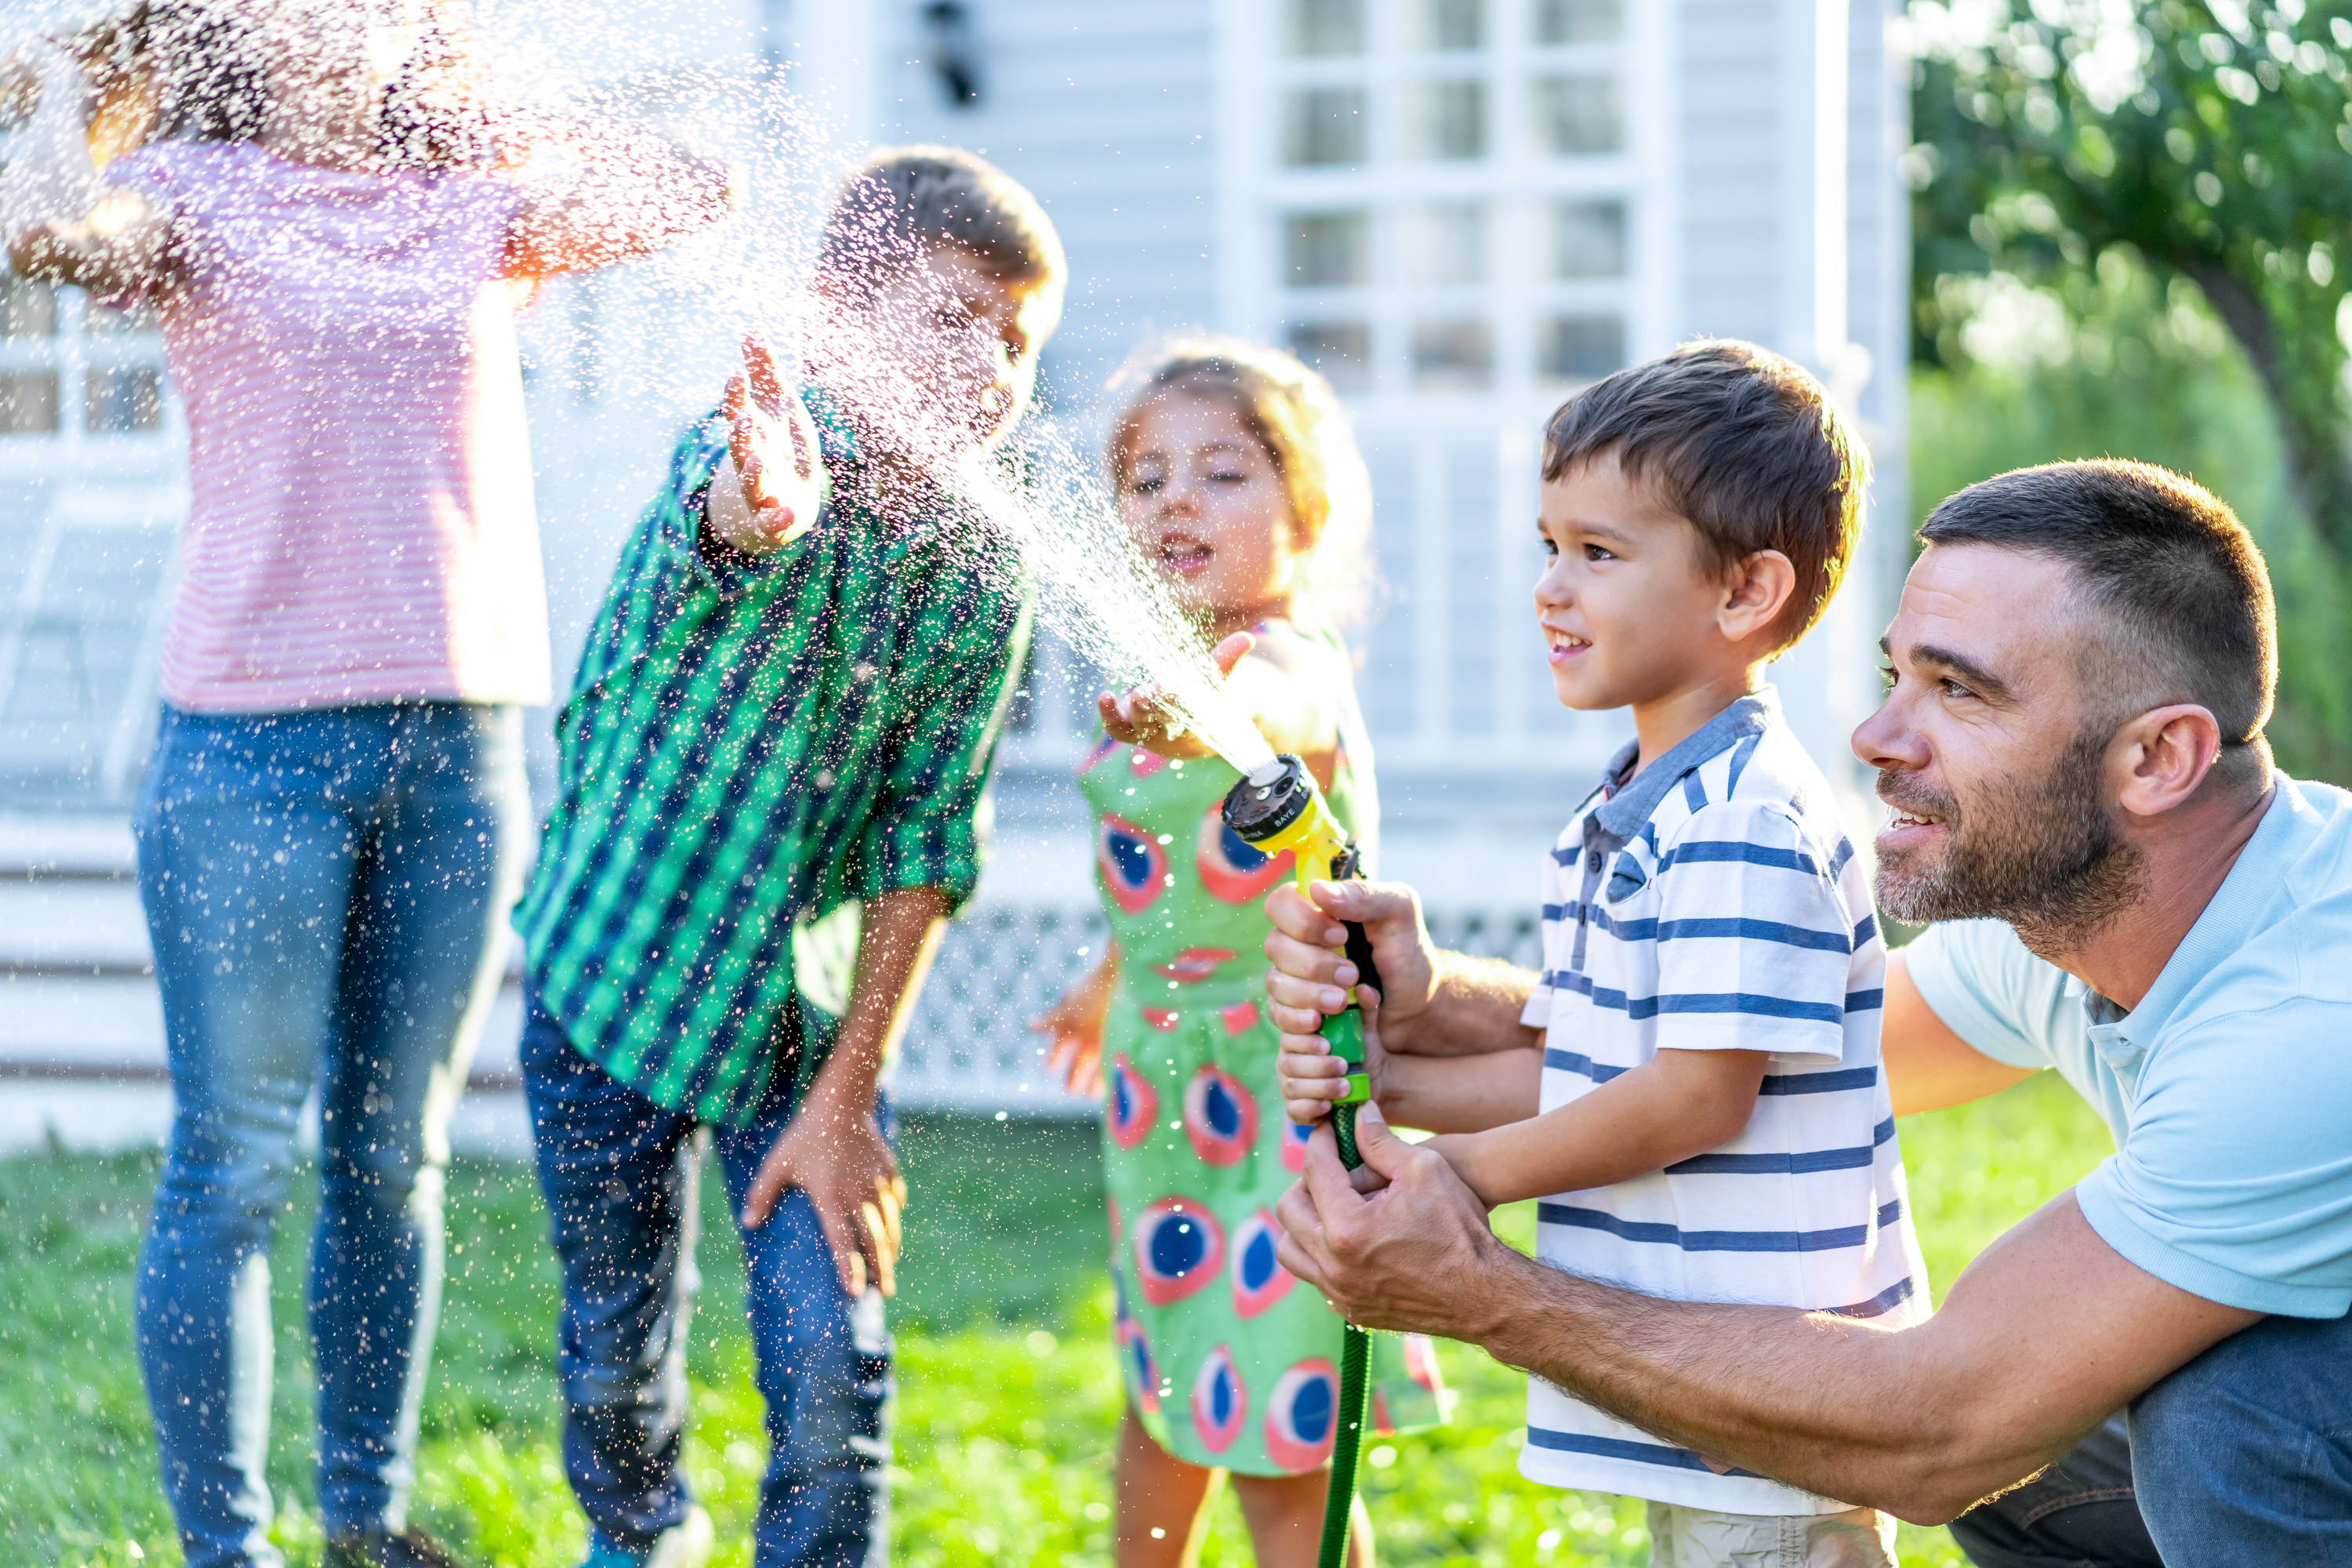 Three siblings and their parents spray a garden hose on their lawn